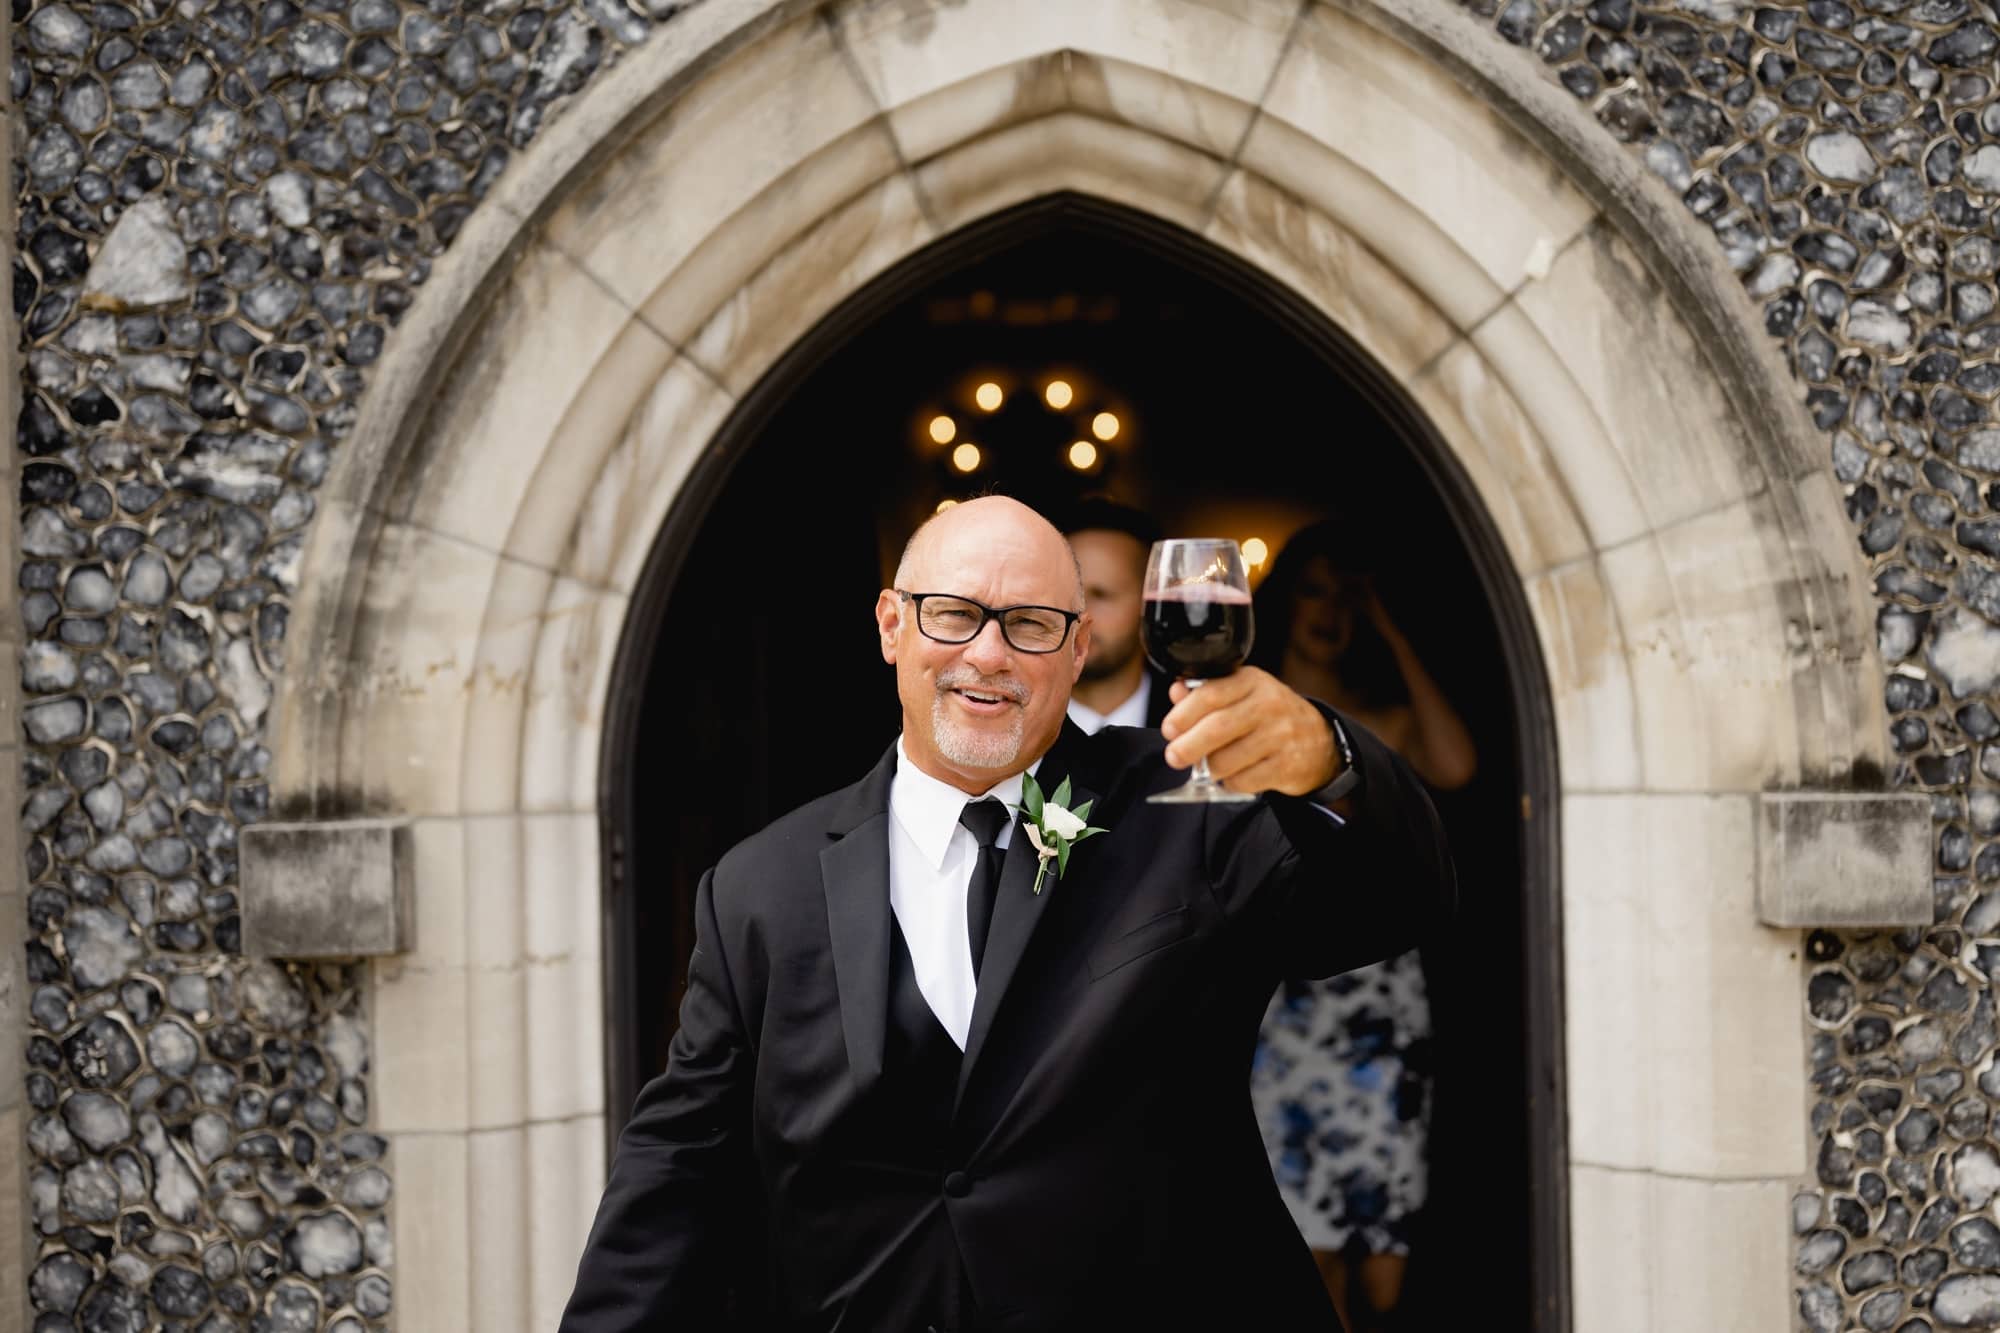 Father of the bride portrait with wine